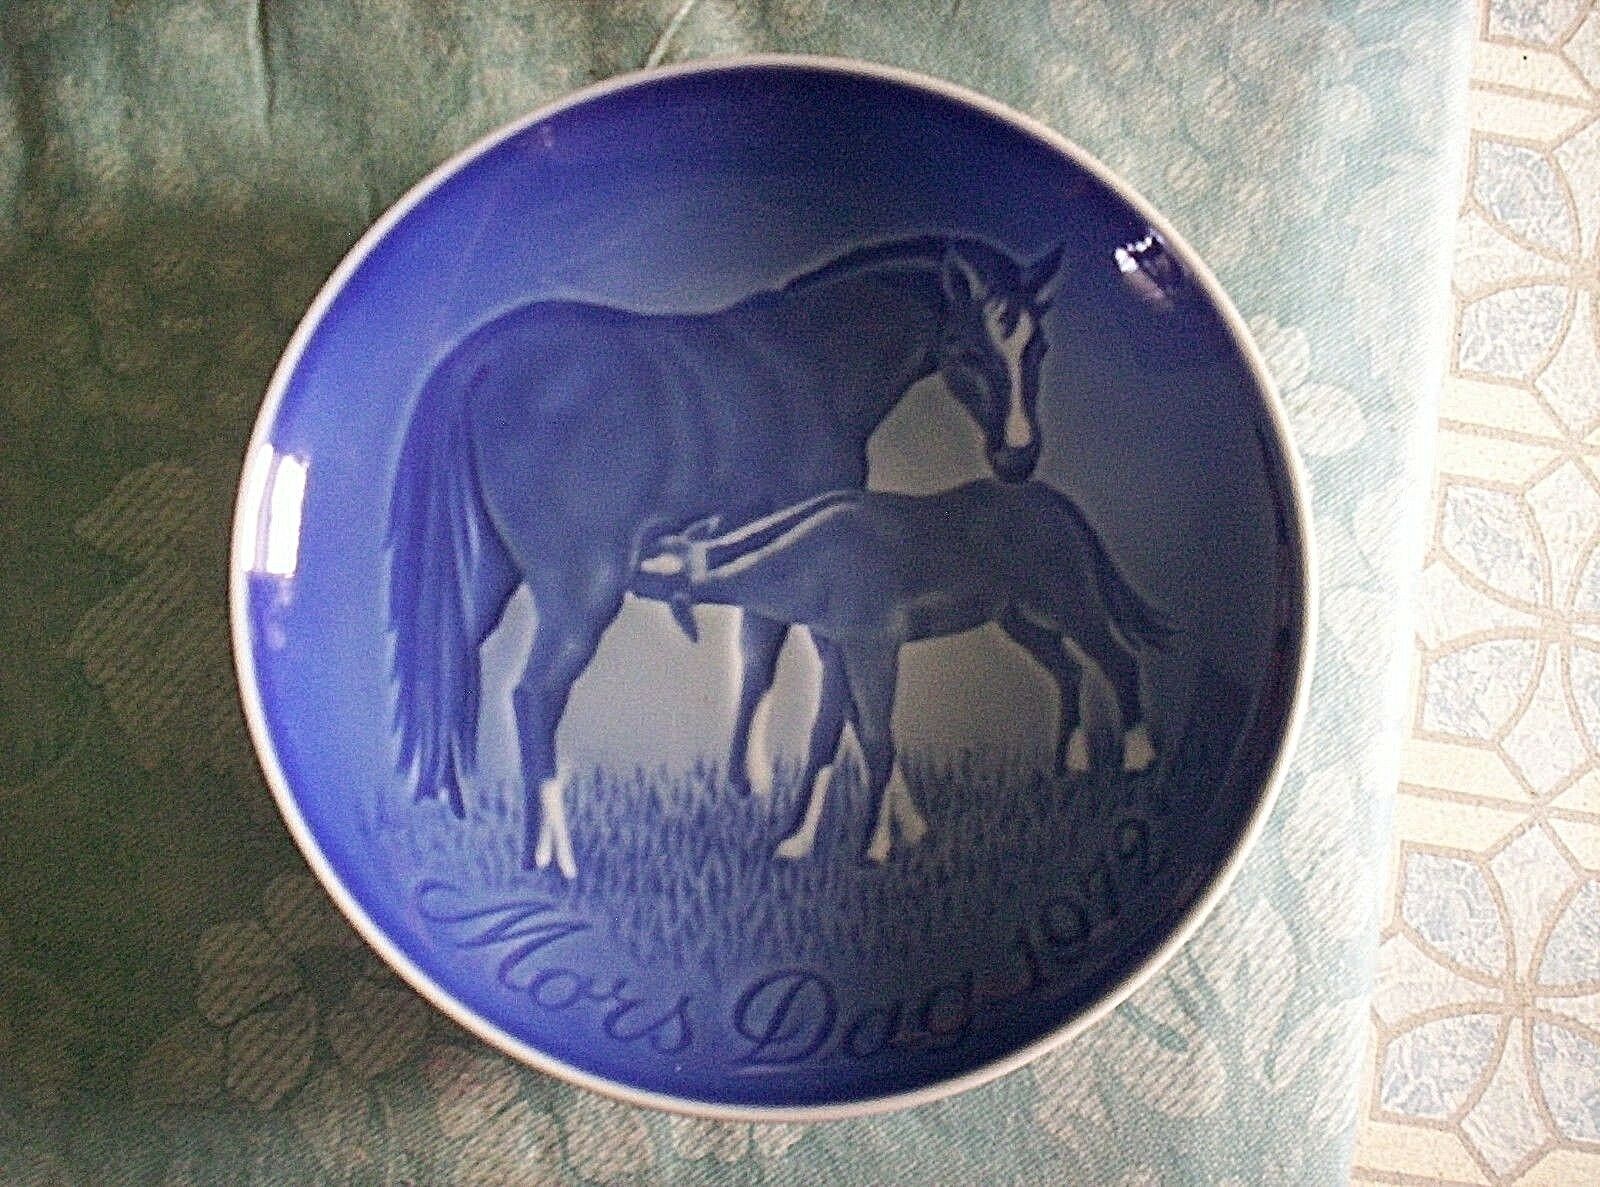 B & G Bing & Grondahl Mors Dag 1972 Mothers Day Plate Mare & Foal Blue Plate